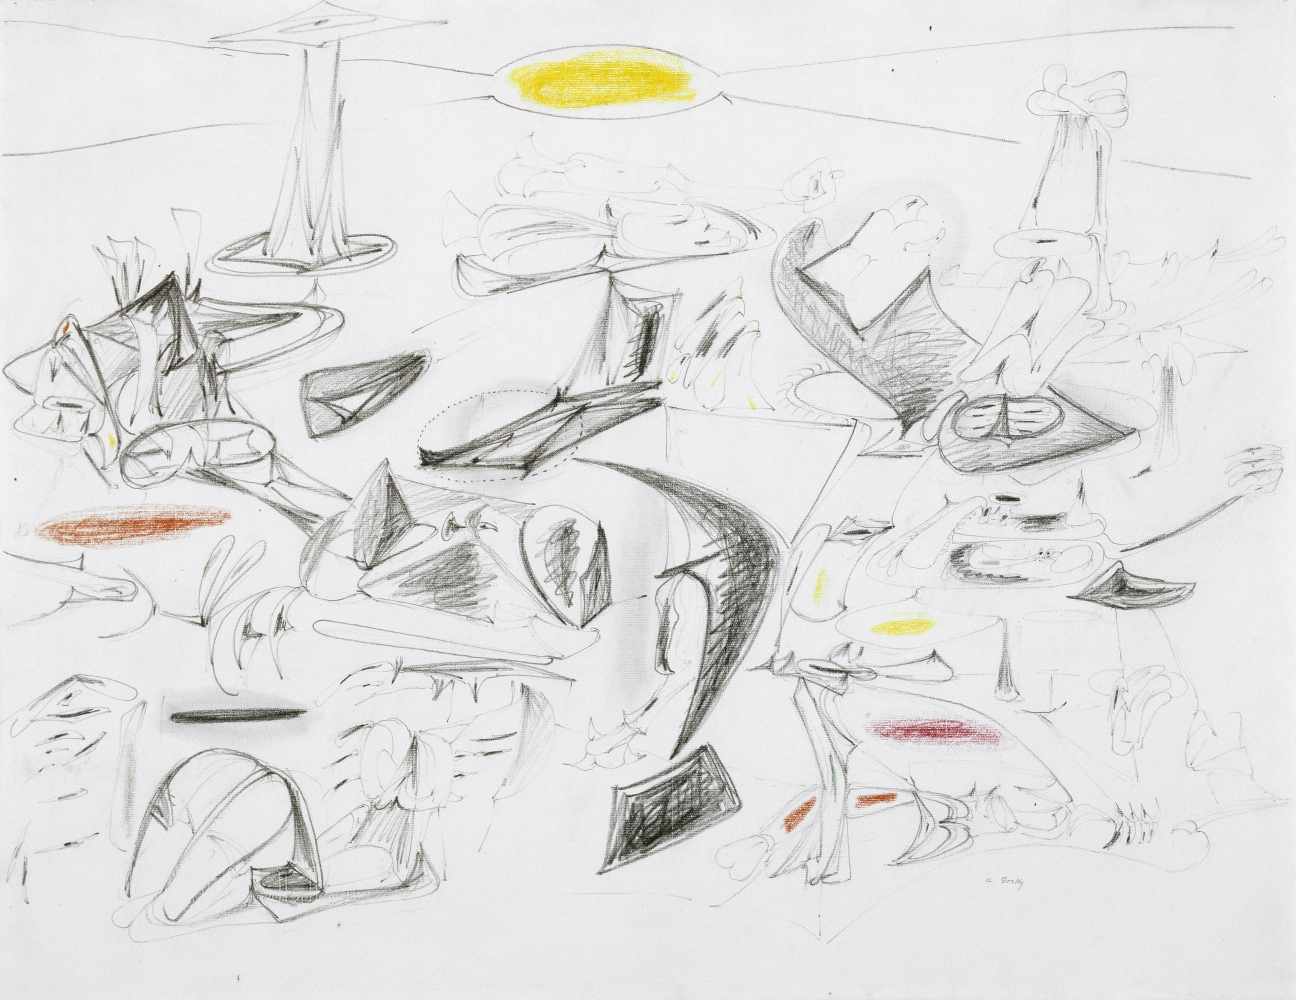 Virginia&mdash;Summer, 1946, graphite pencil and crayon on laid paper, 18 15/16 x 24 3/8 in. (48.1 x 61.9 cm). The Museum of Fine Arts, Houston, Museum purchase funded by Oveta Culp Hobby, 92.424.&nbsp;[AGCR: D1440]